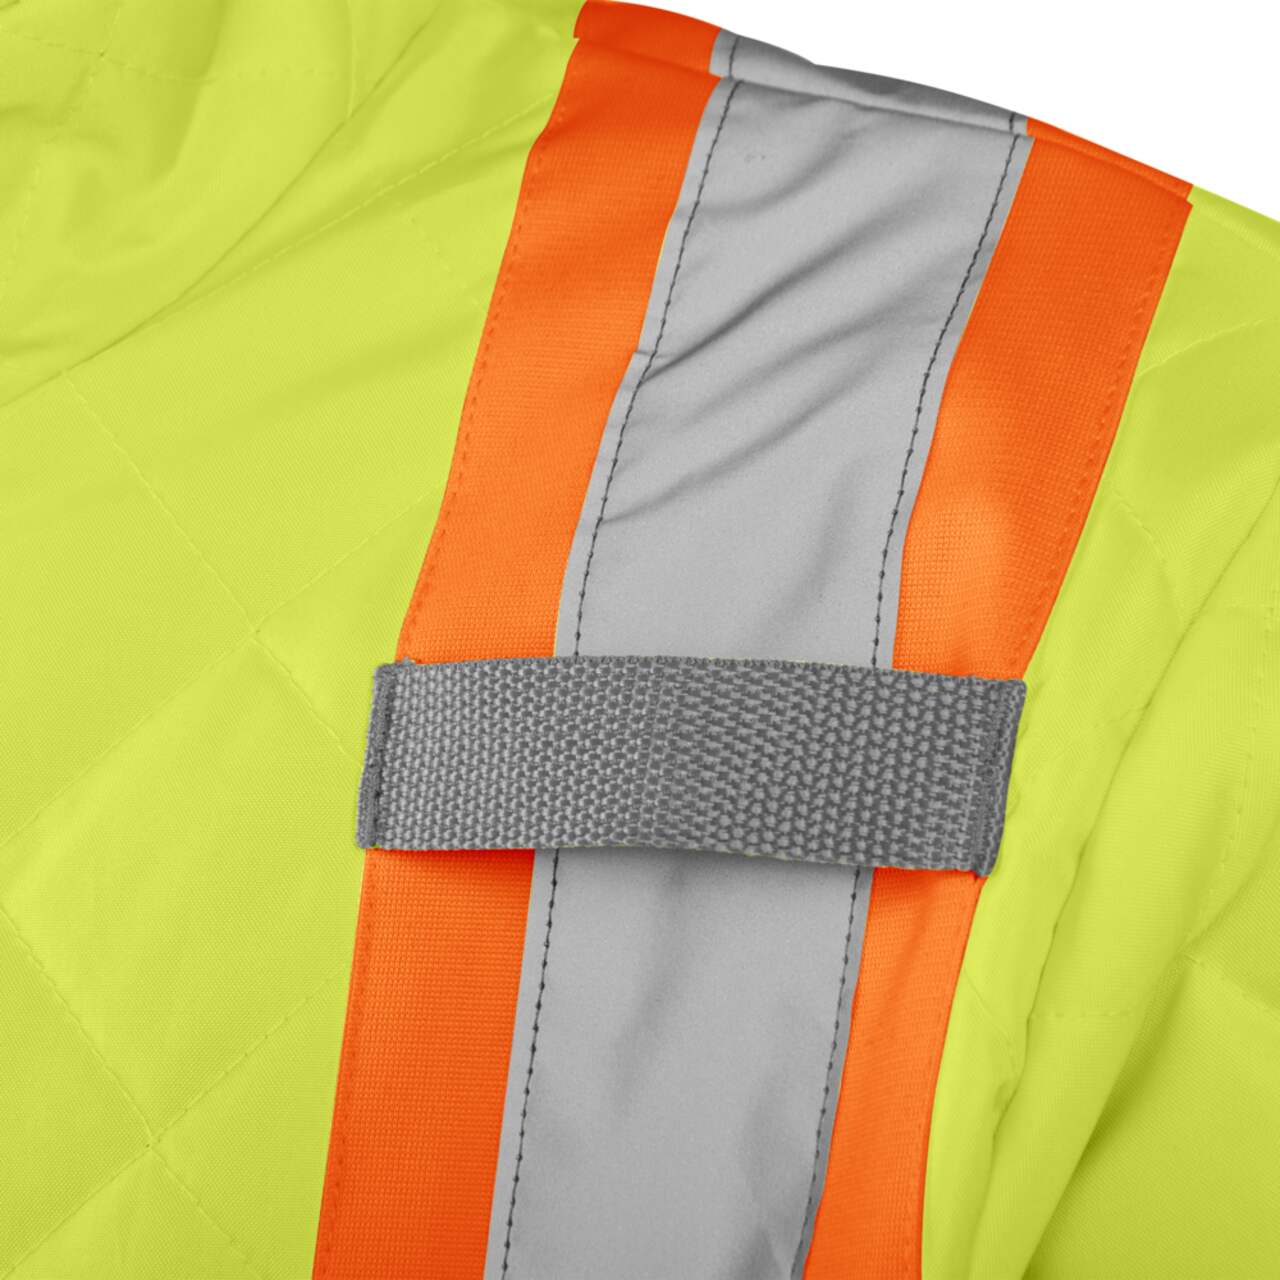 Terra Hi-Vis Rain Jacket with Reflective Tape and Removable Hood